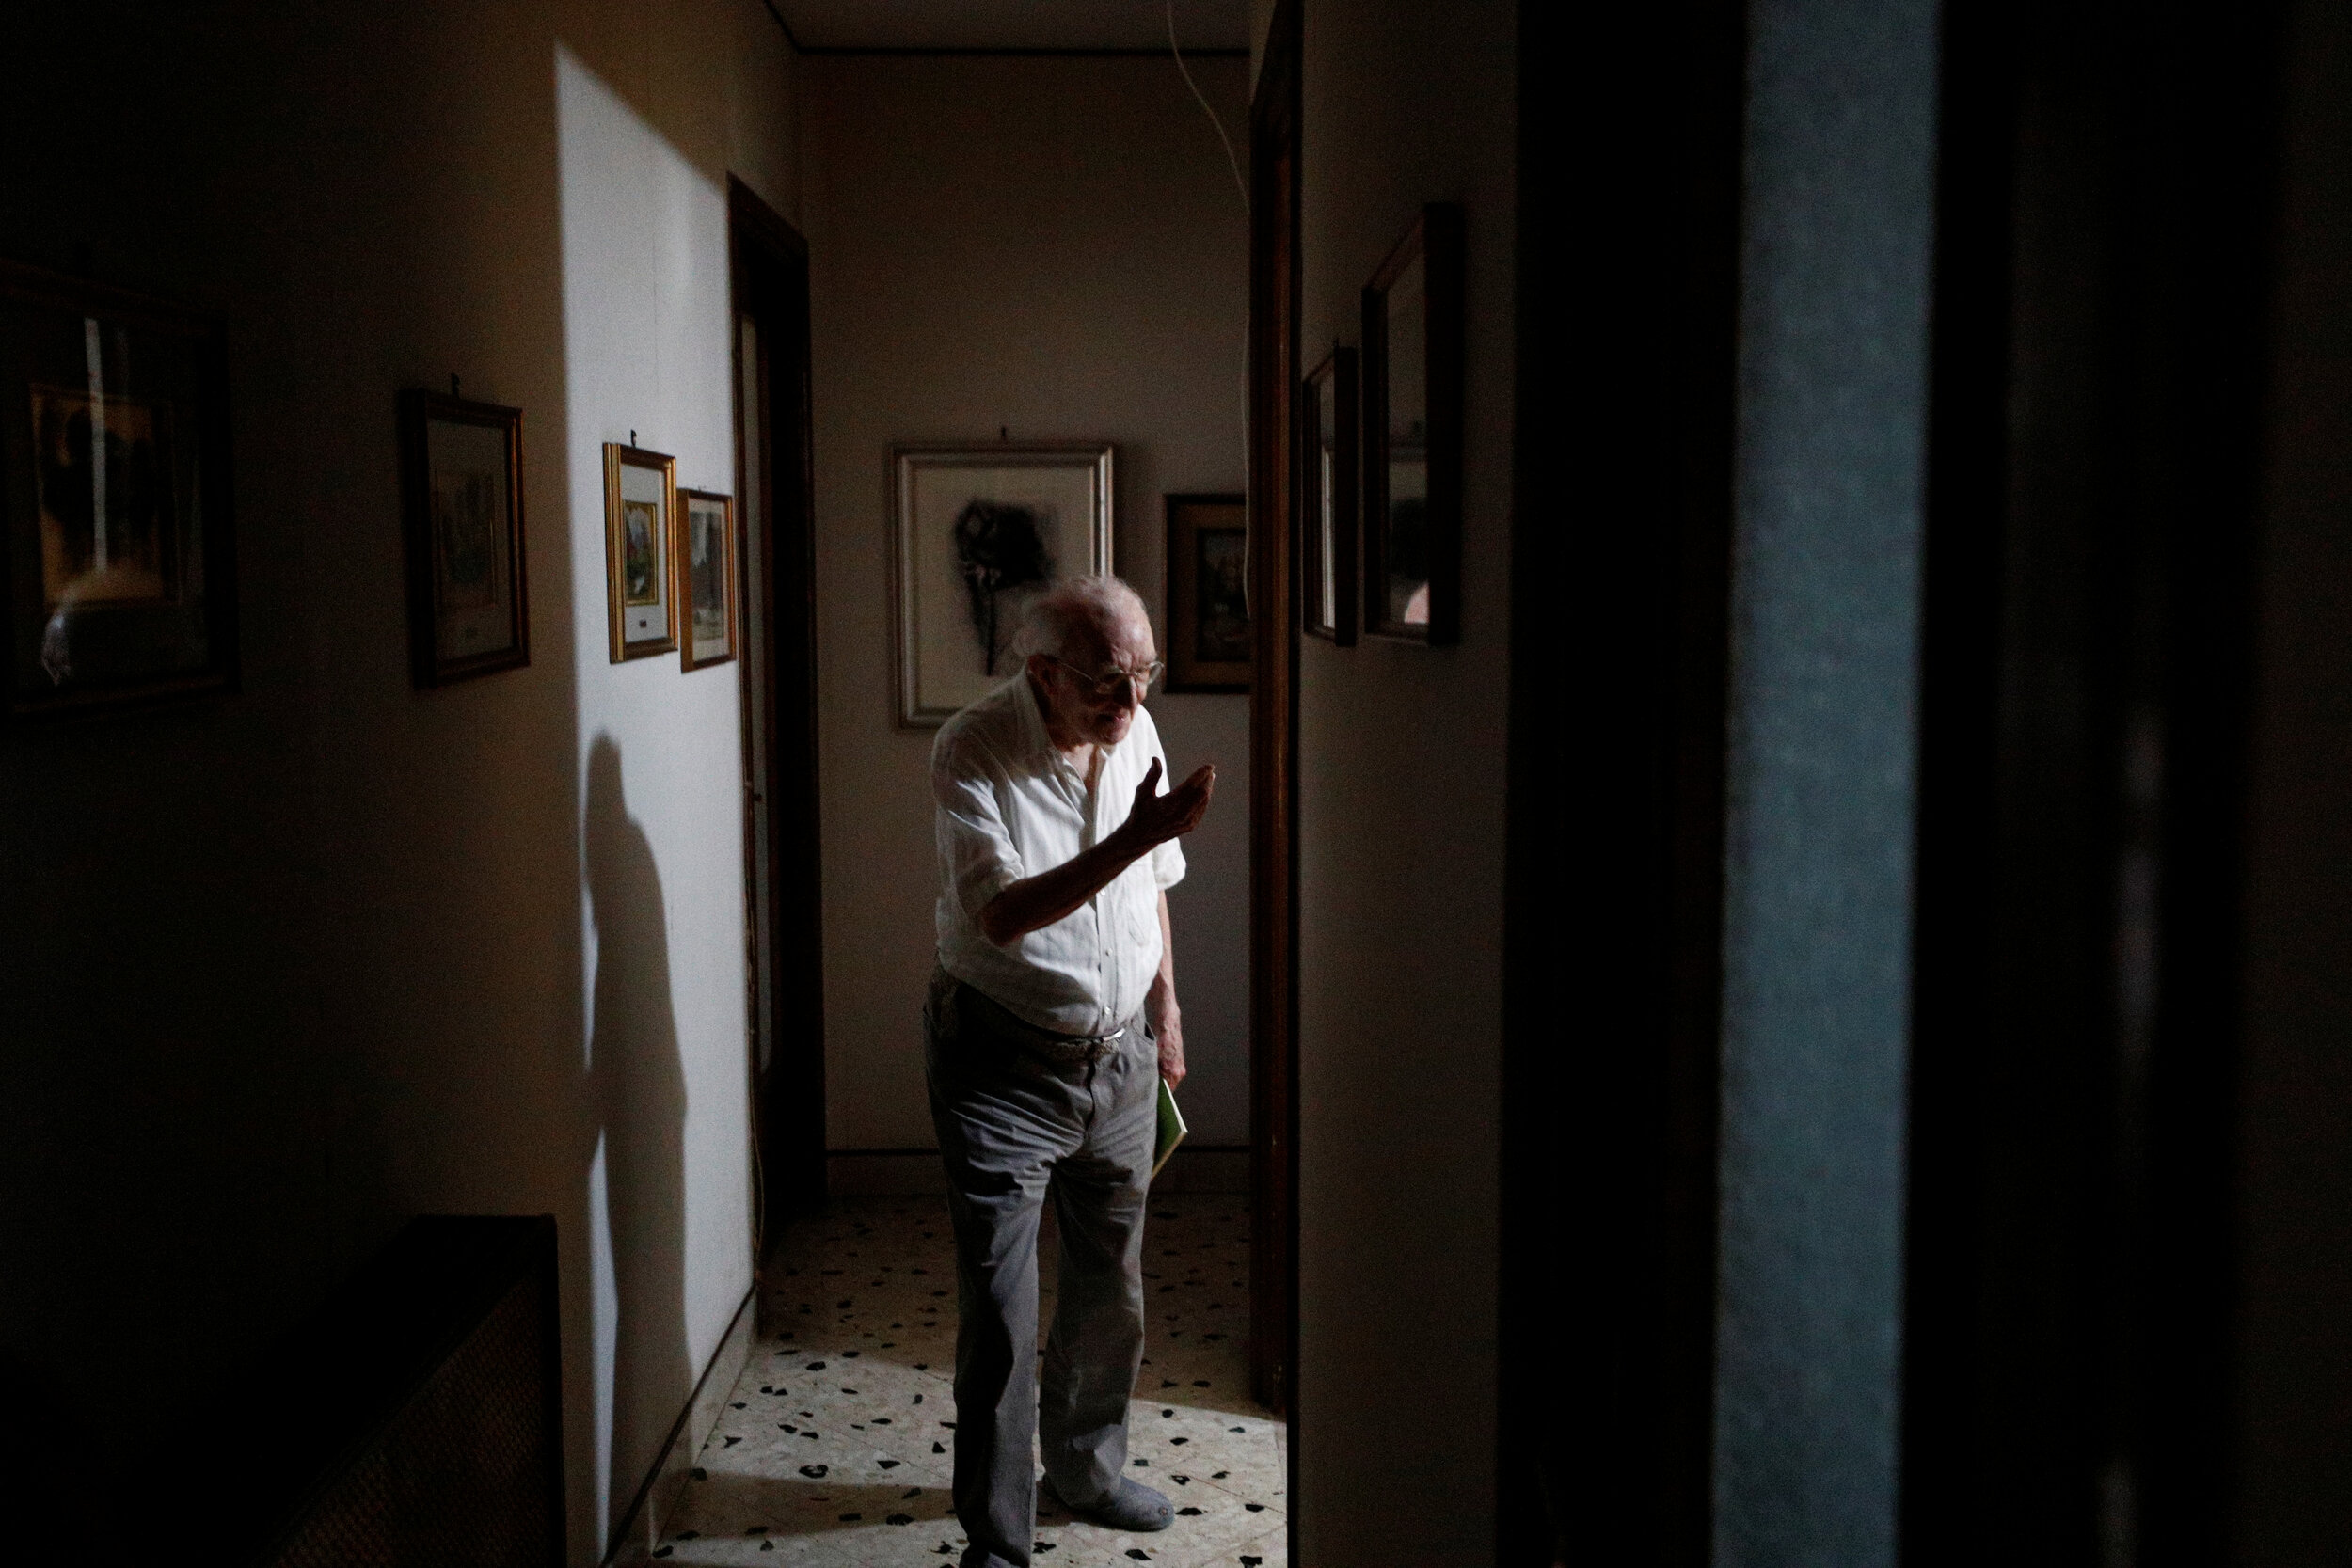  Giuseppe Paterno, 96, Italy's oldest student, gestures to his carer, two days before he graduates from The University of Palermo with an undergraduate degree in history and philosophy, at his home in Palermo, Italy, July 27, 2020. 